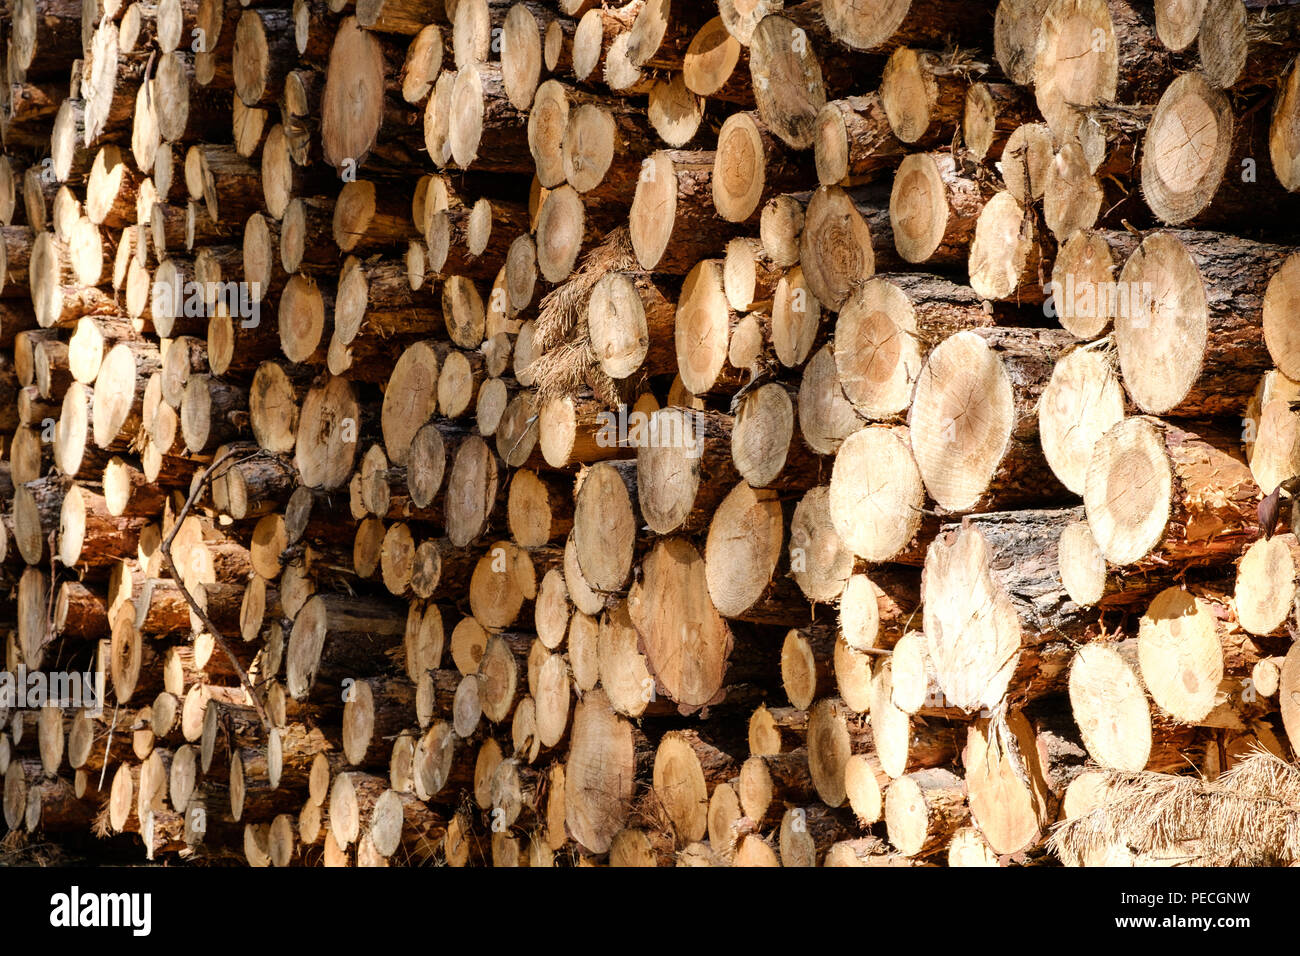 logs of trees - lumber industry - wood production Stock Photo